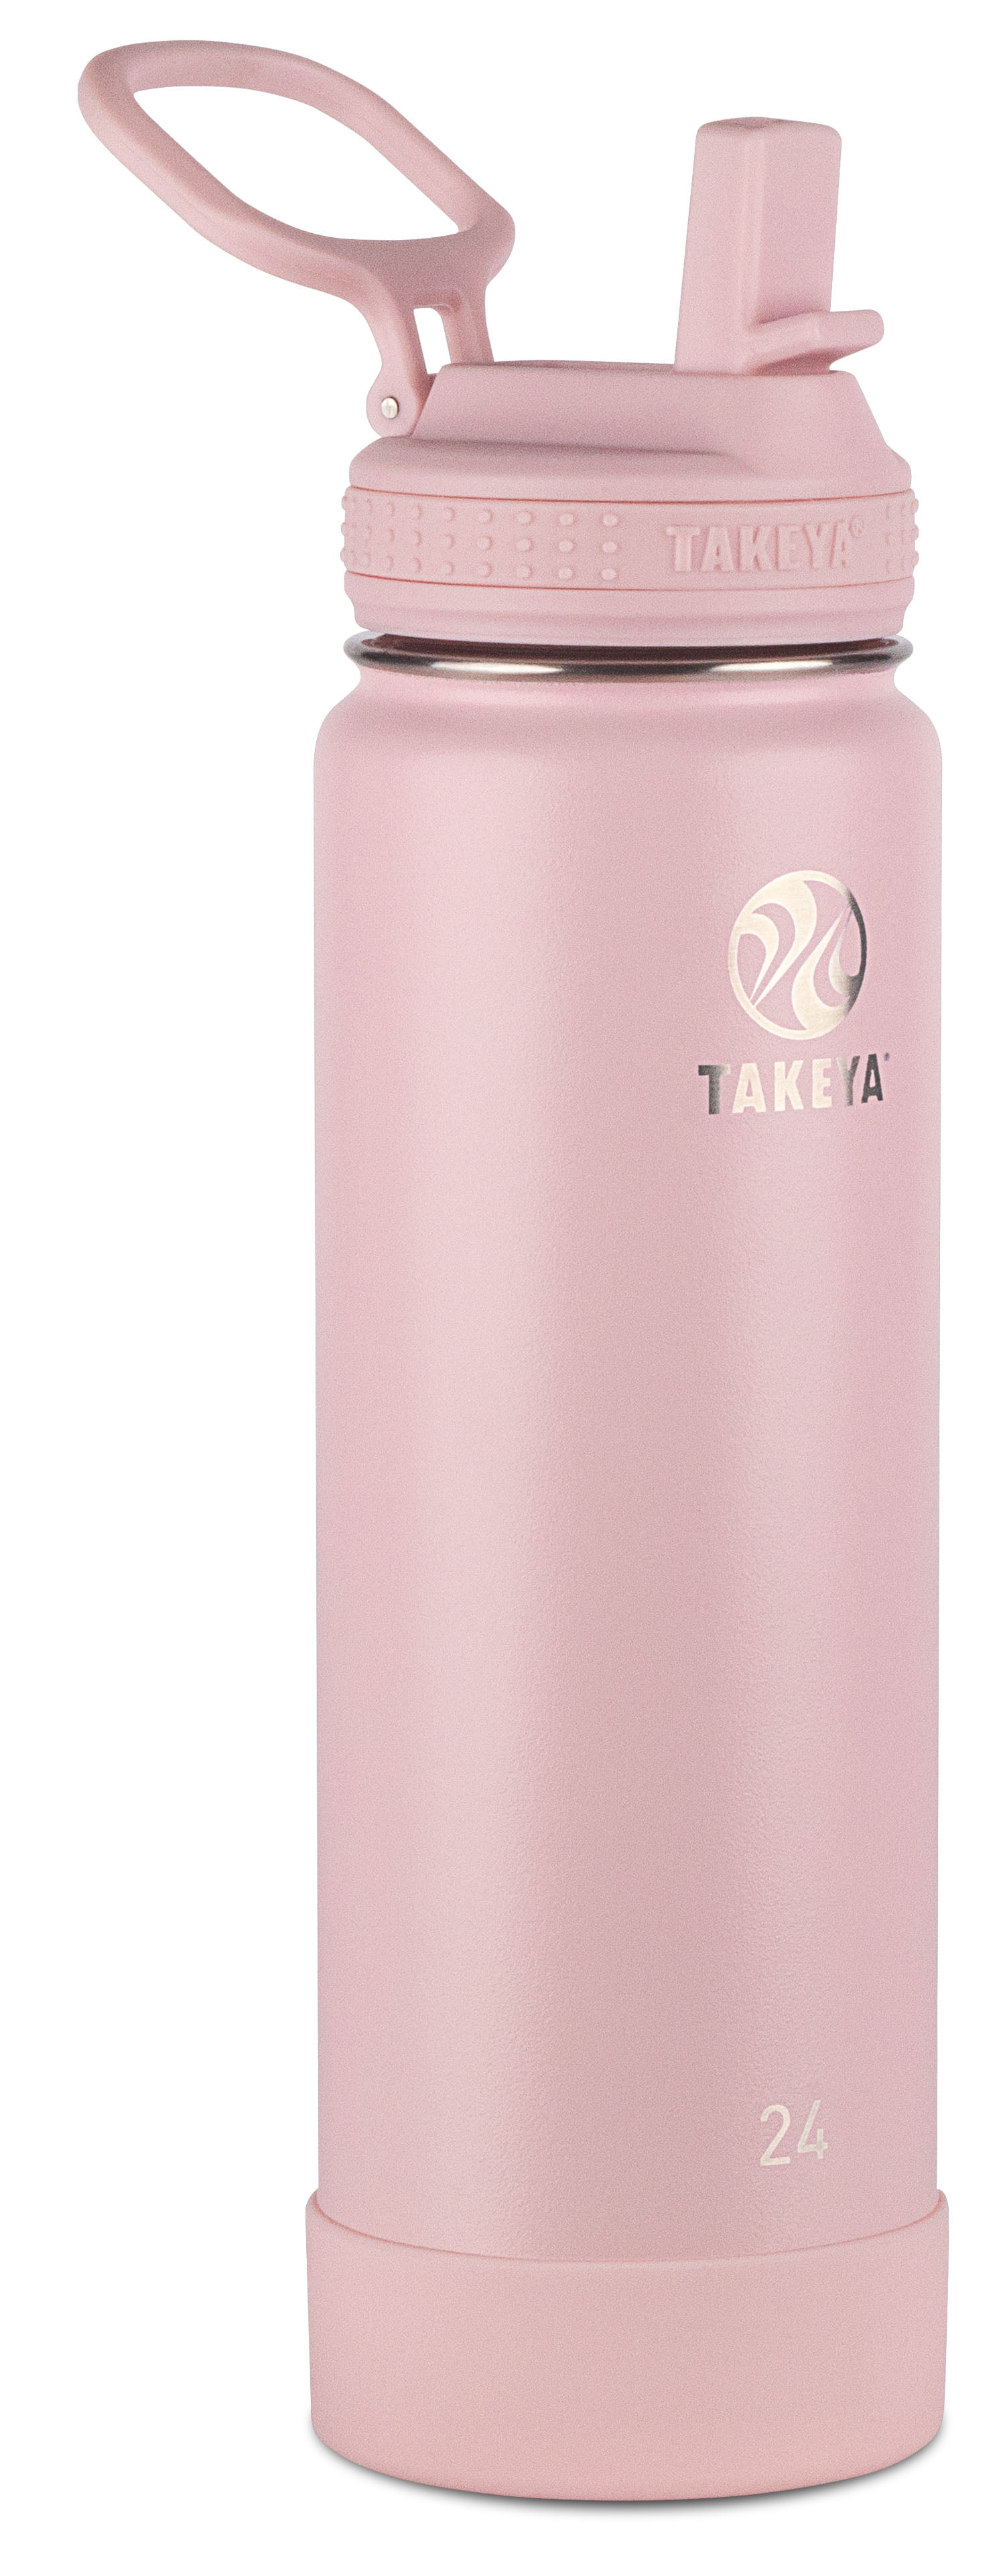 Takeya Actives Stainless Steel Bottle with Insulated Spout Lid, Arctic White, 32 oz